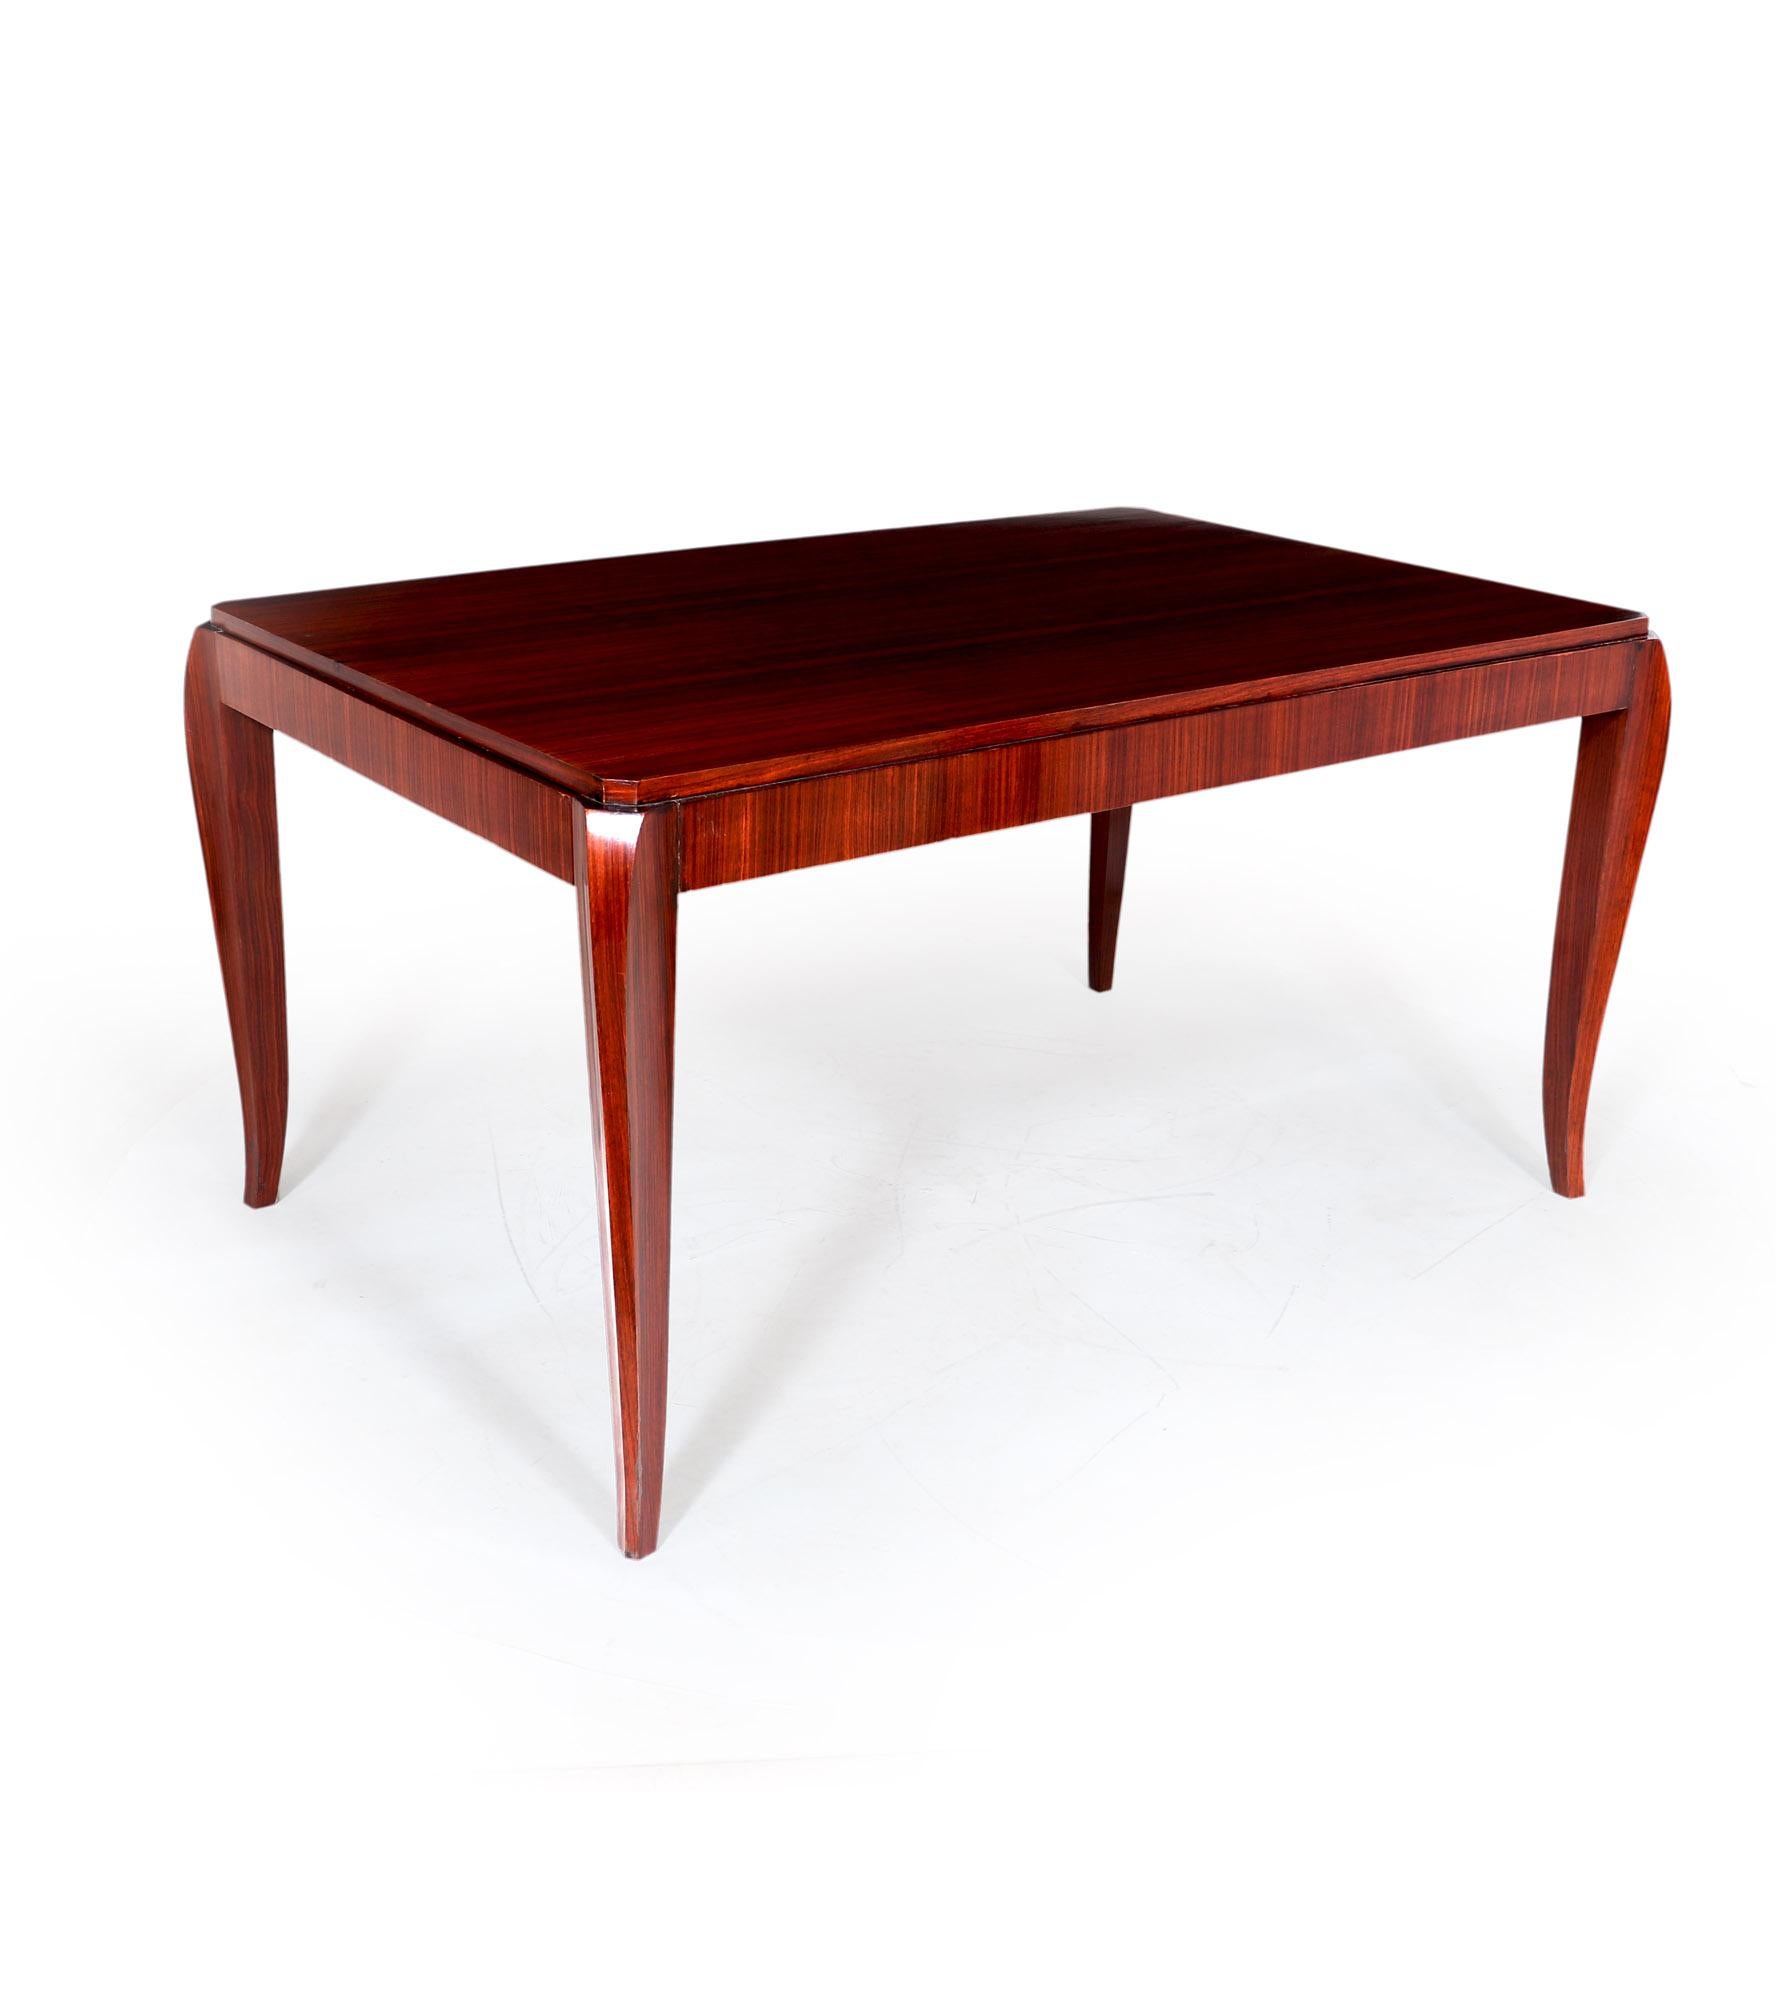 20th Century French Art Deco Dining Table, c1920 For Sale